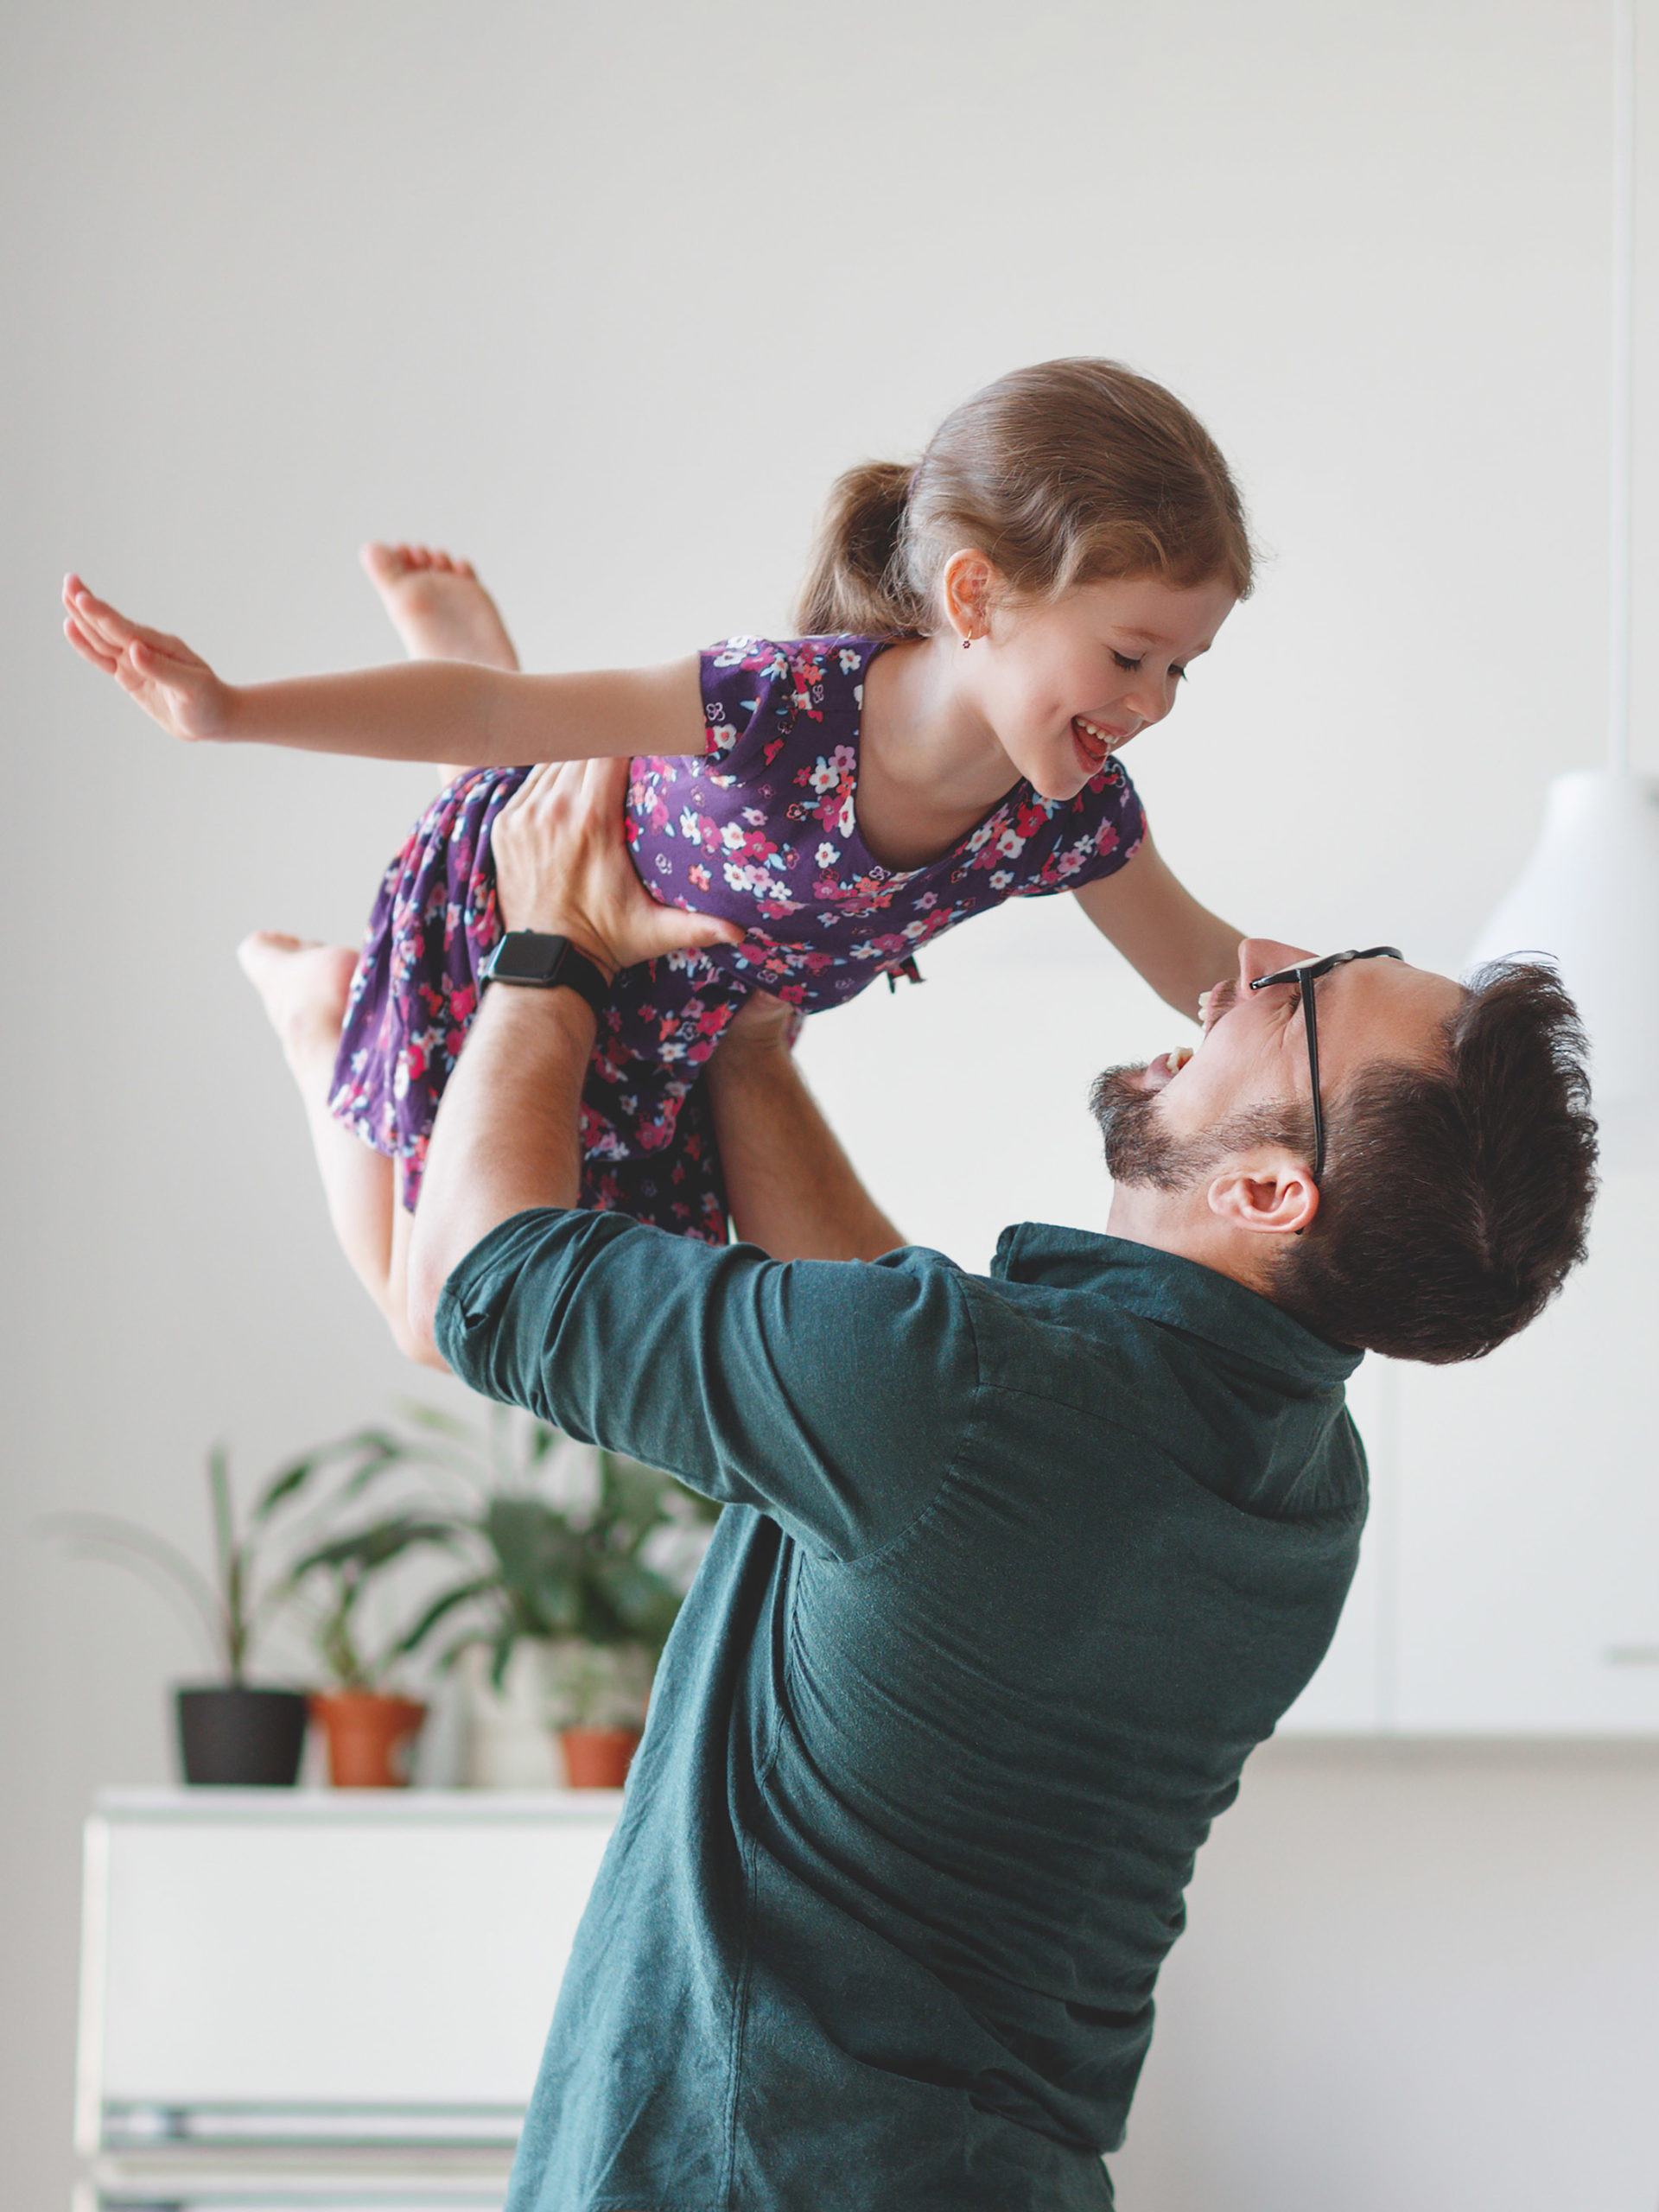 dad playing with daughter holding her above his head while she flies like an airplane